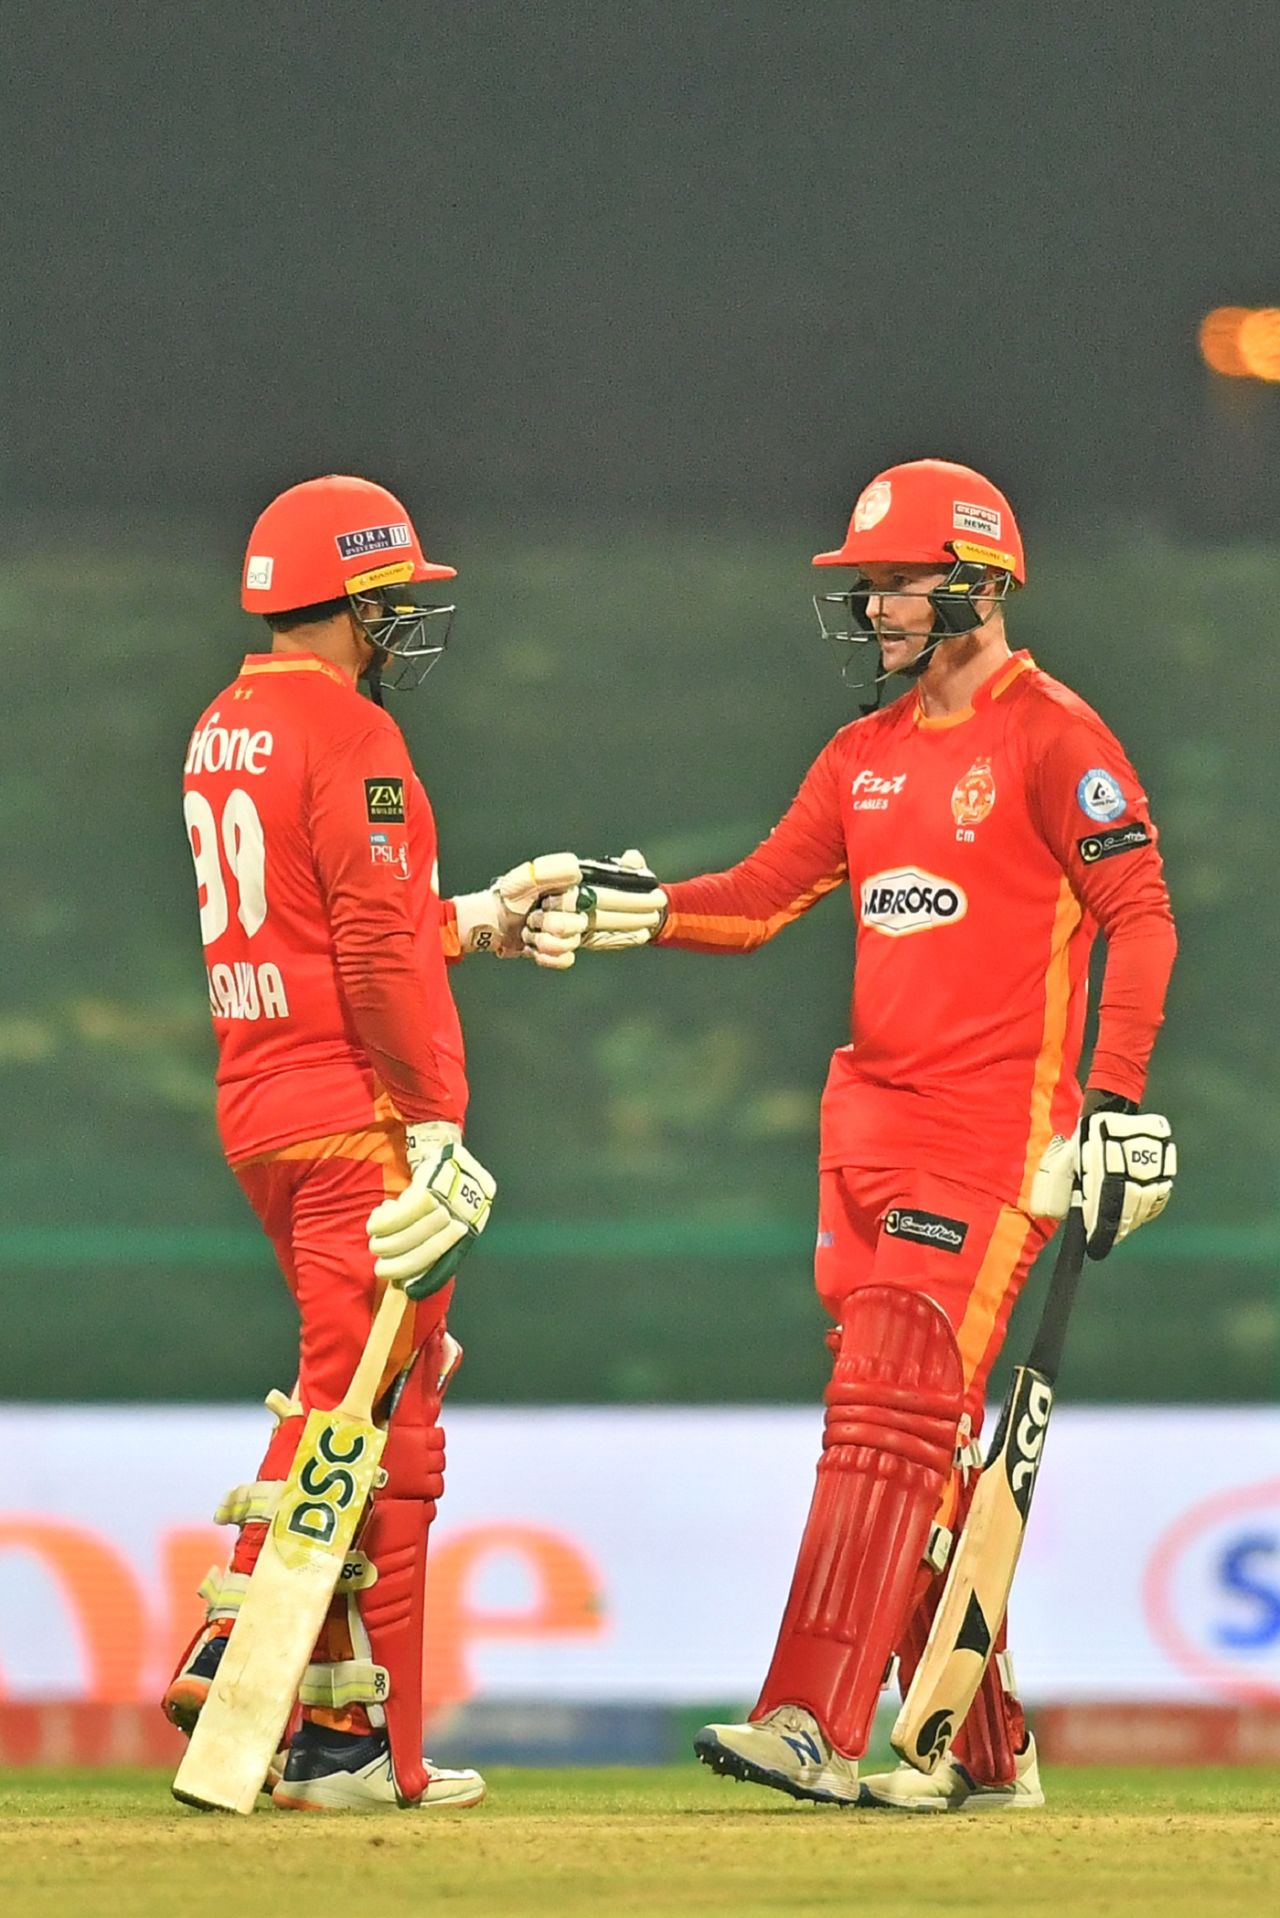 Colin Munro and Usman Khawaja chased down 134 in 10 overs Quetta Gladiators vs Islamabad United, PSL 2021, Abu Dhabi, June 11, 2021